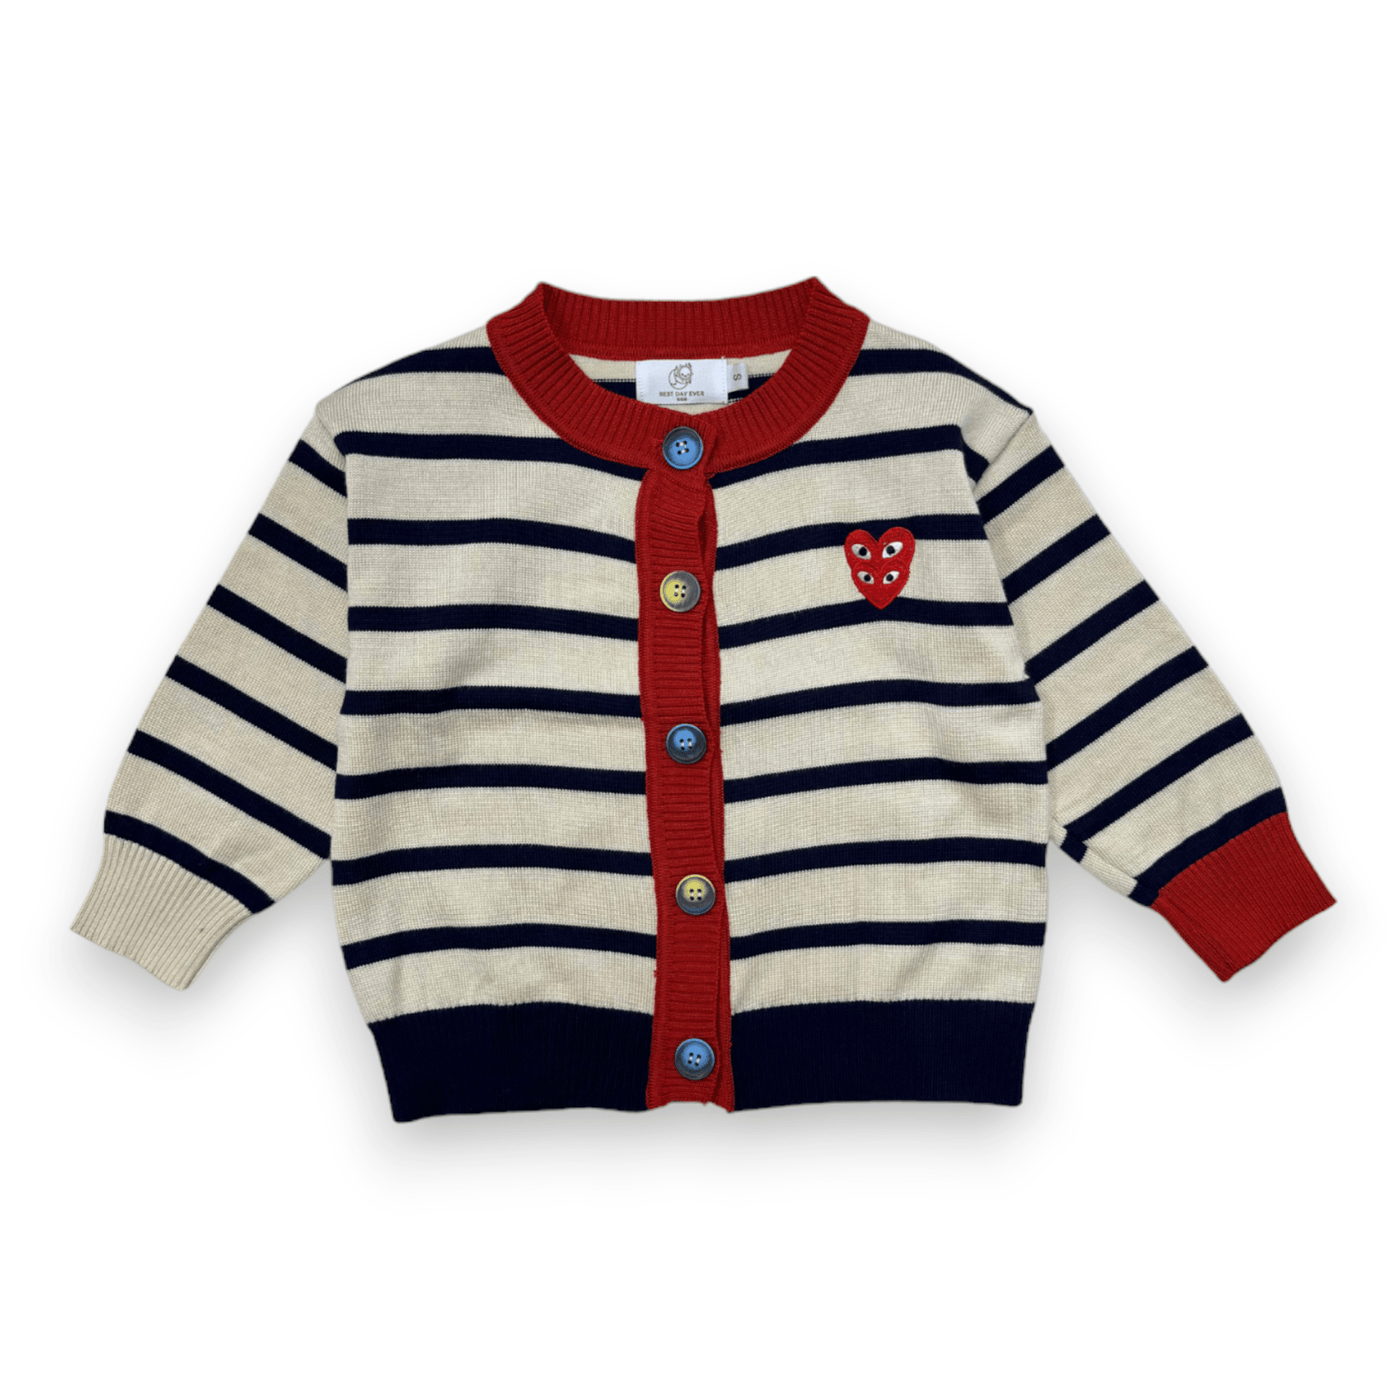 Best Day Ever Kids Baby & Toddler Outerwear Feisty Hearts Cardigan buy online boutique kids clothing